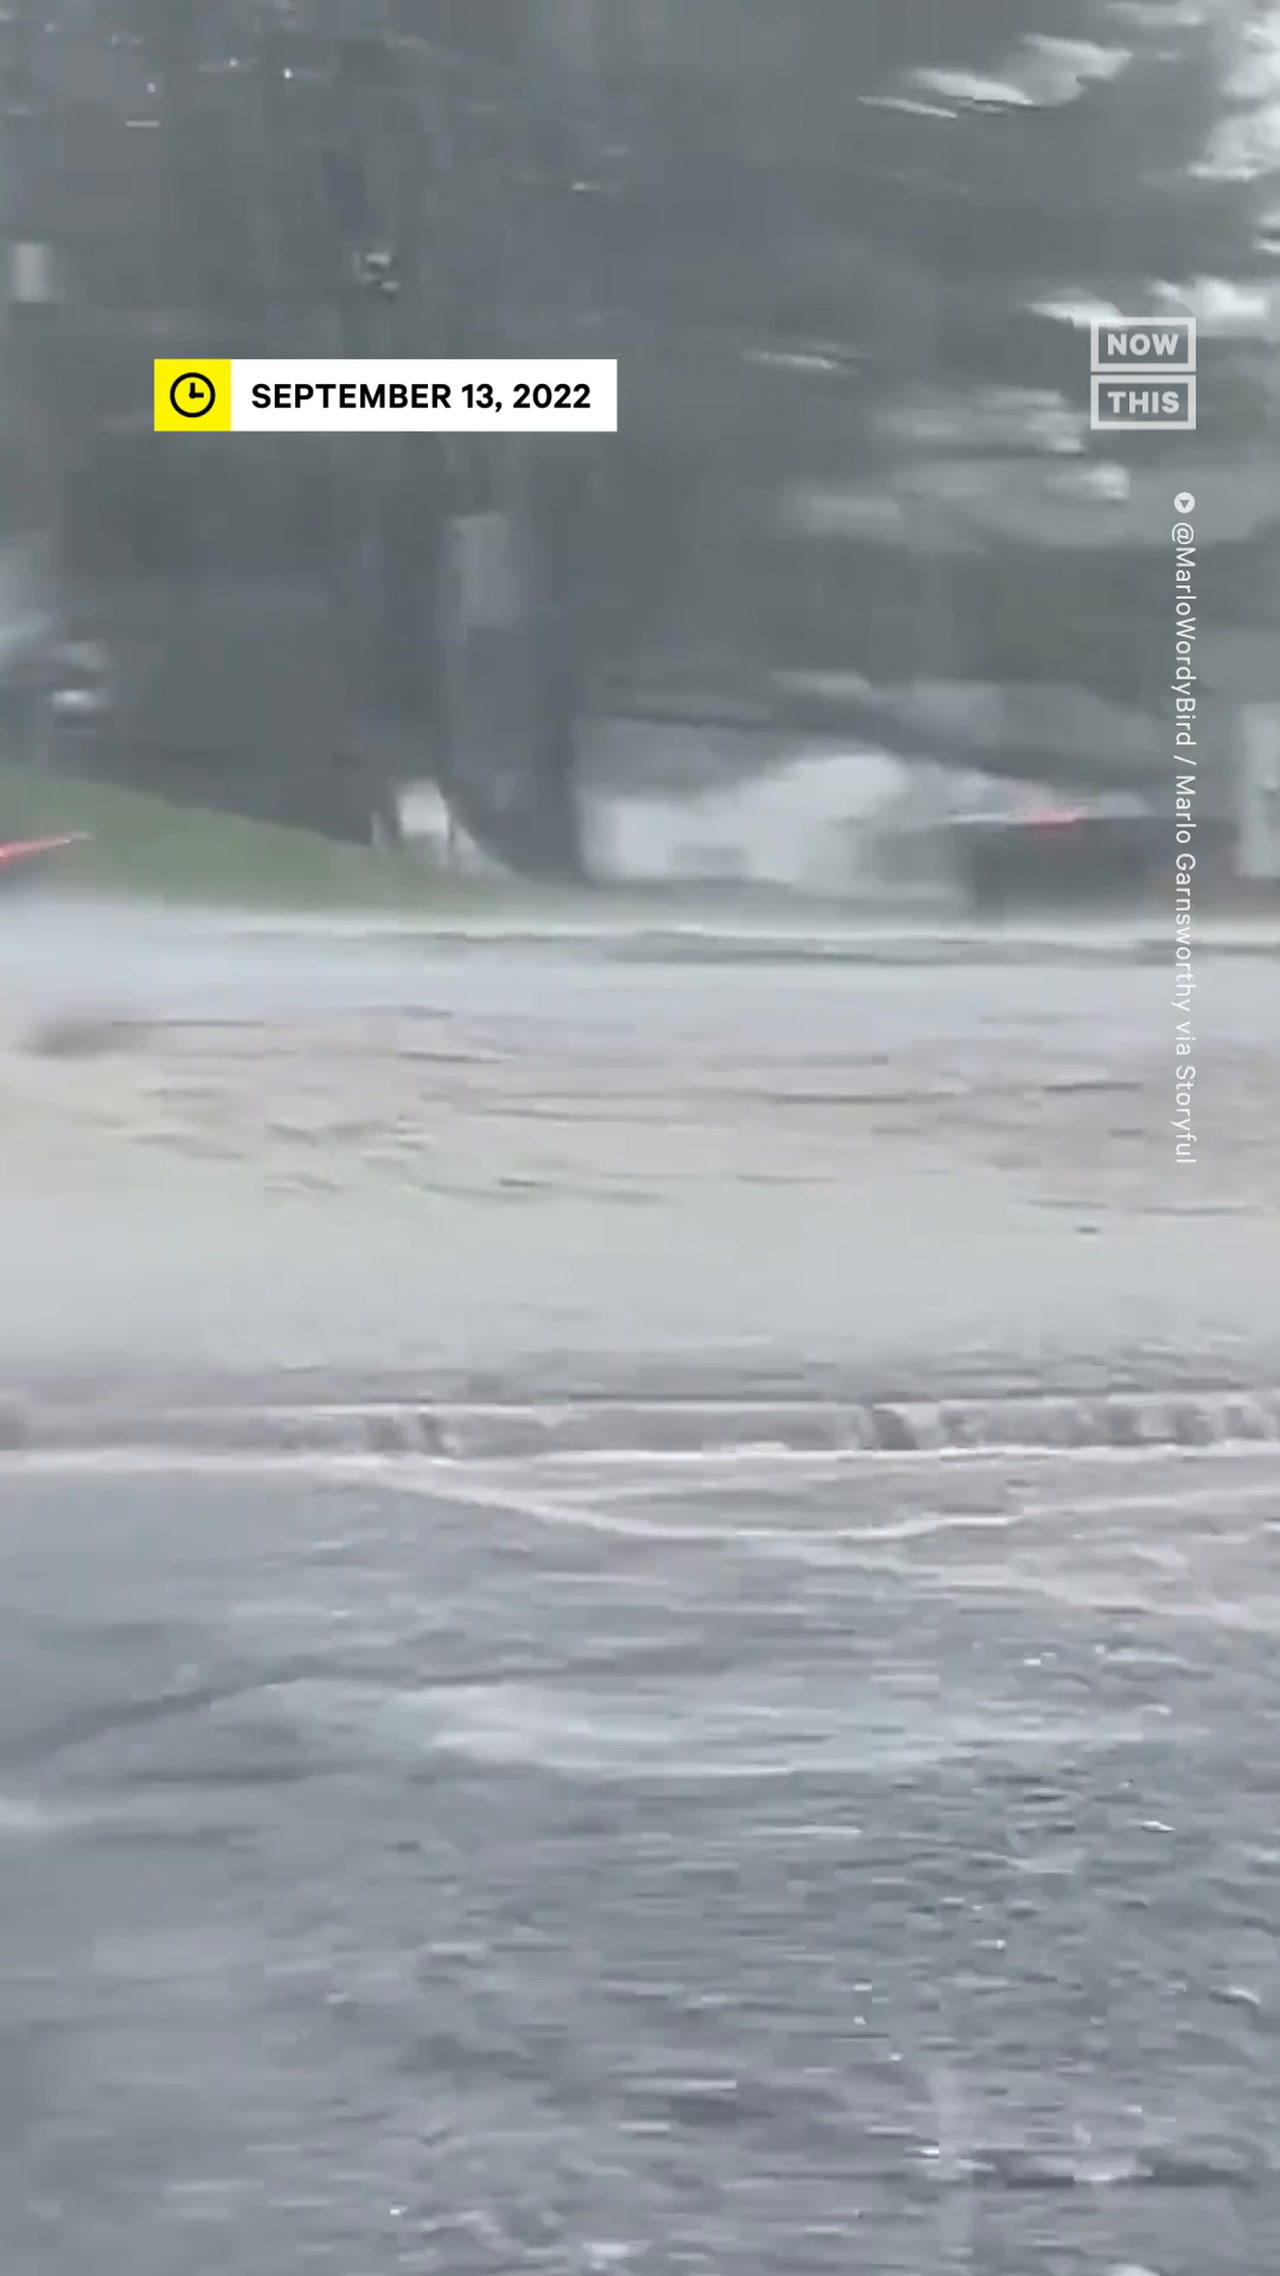 VW Beetle Attempts to Drive Through Flash Flood